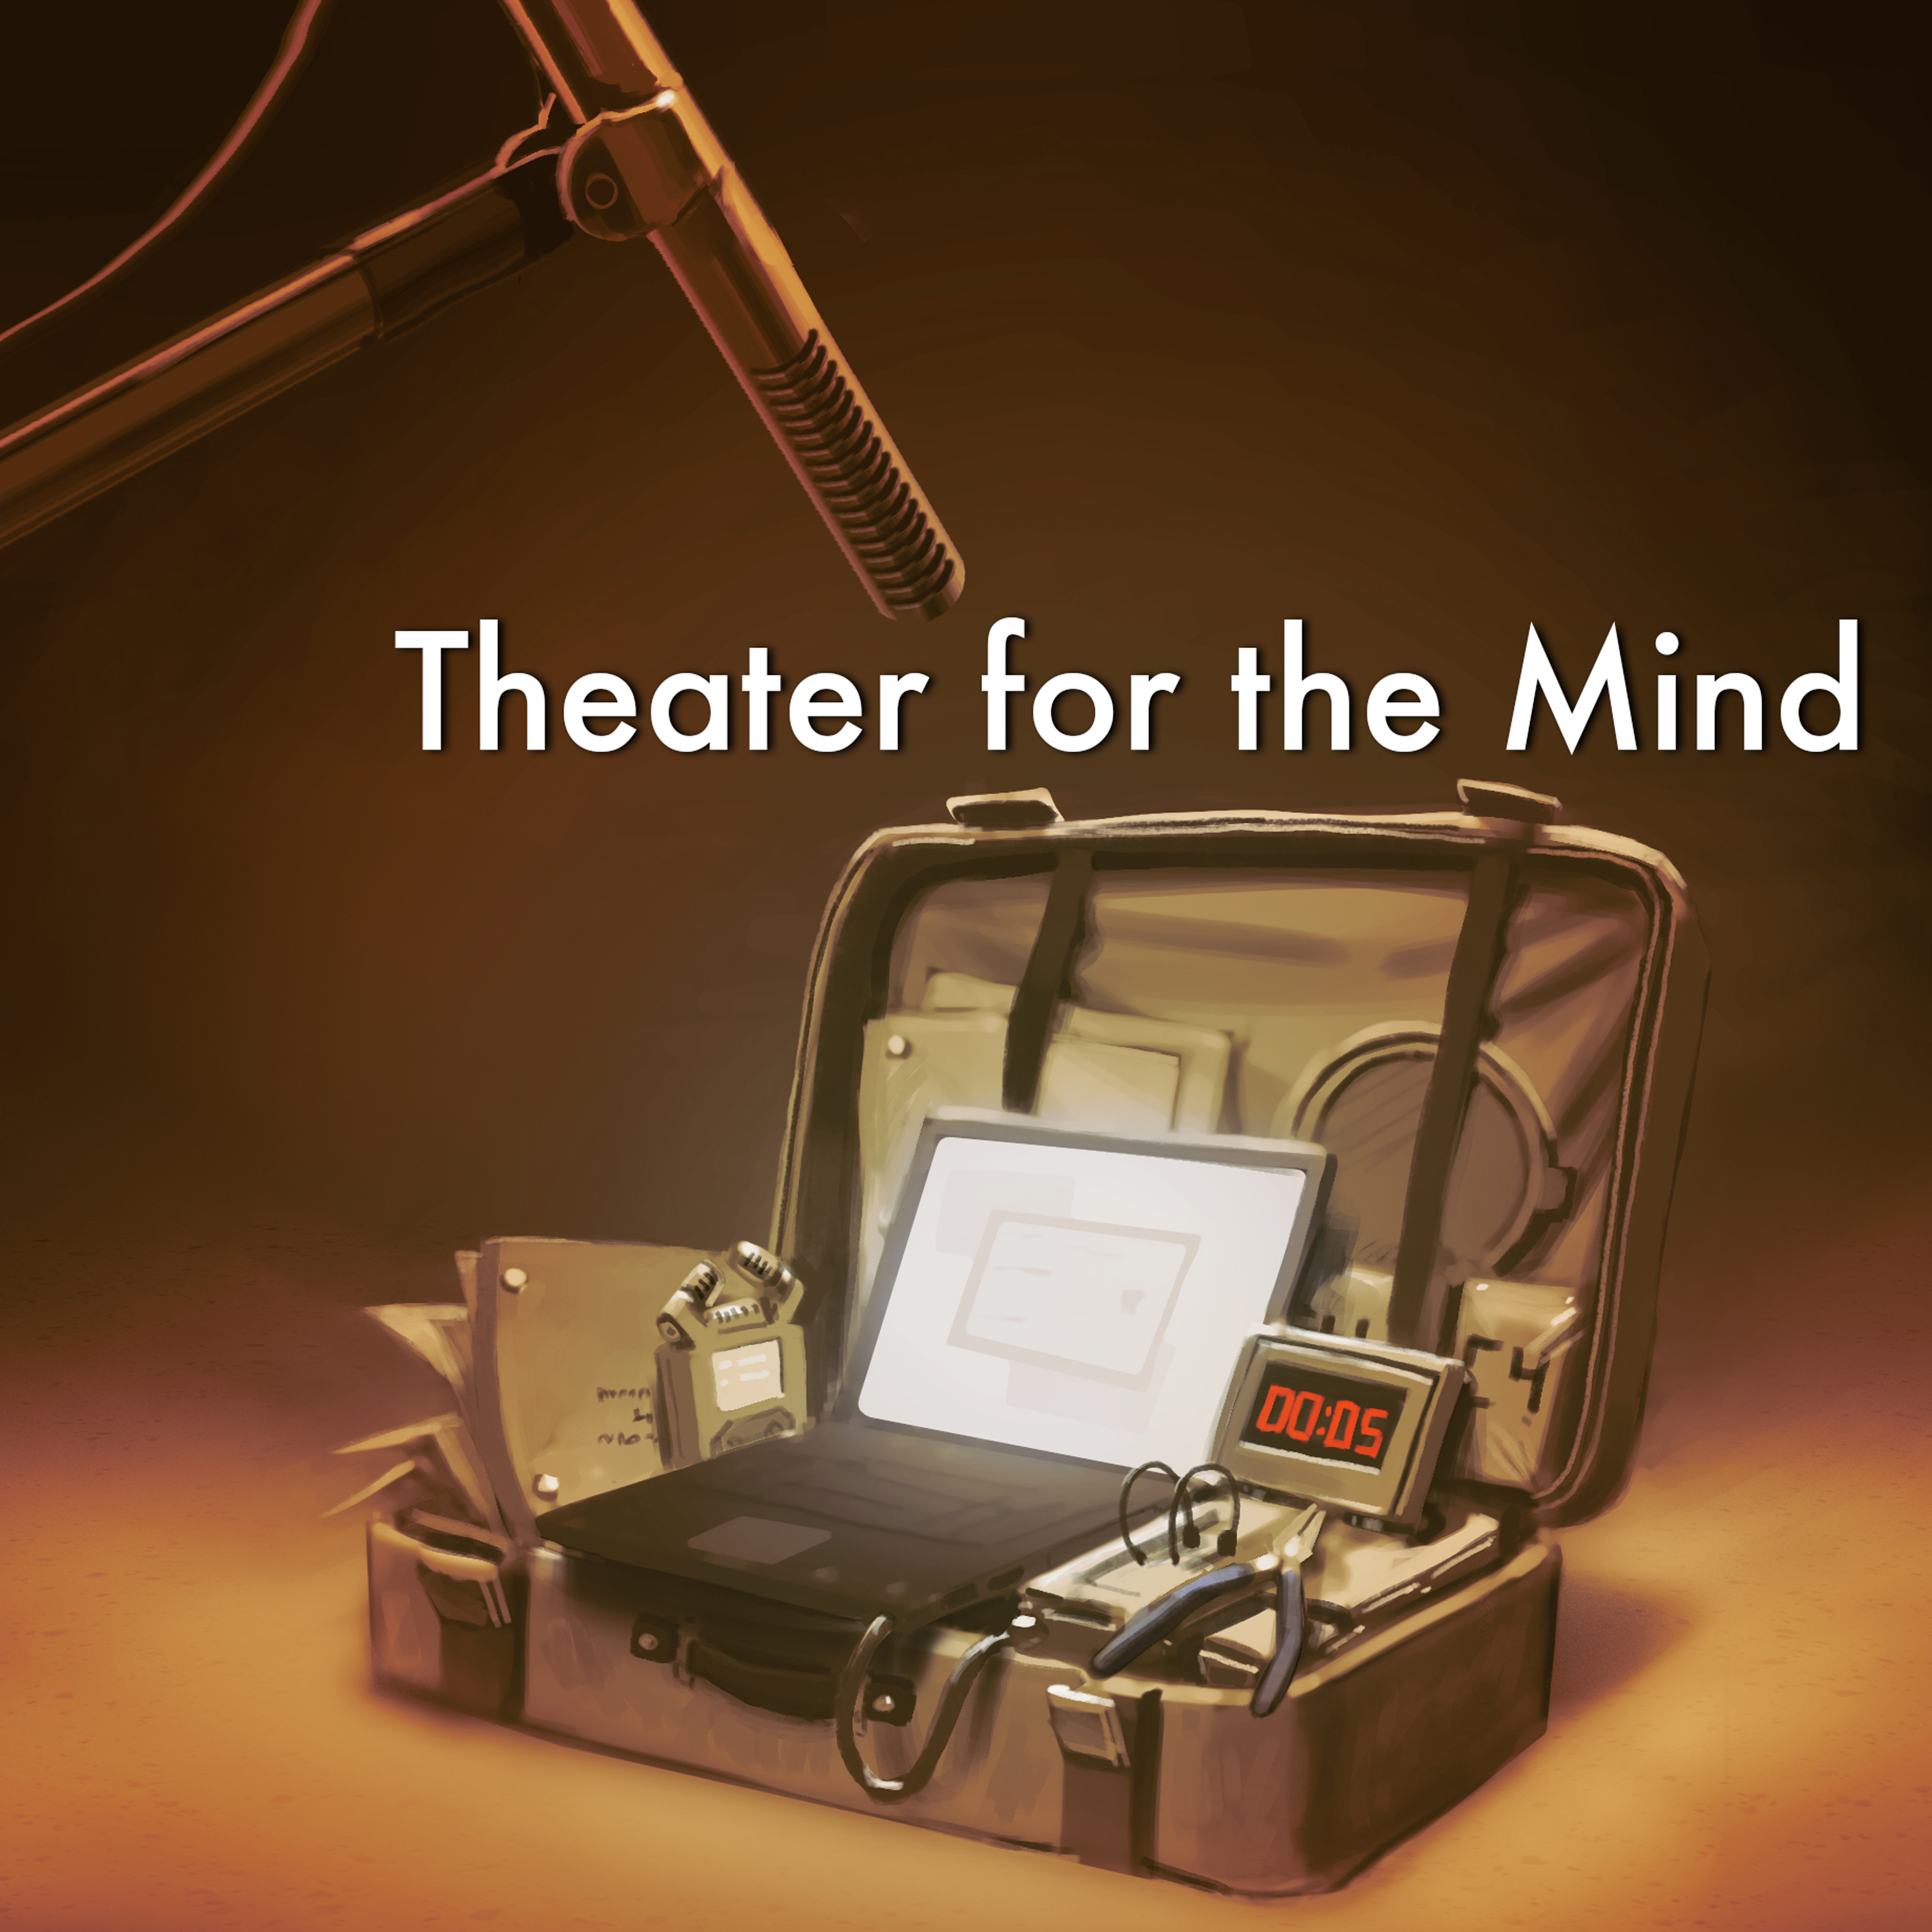 ”Triage” - 101 Theater for the Mind